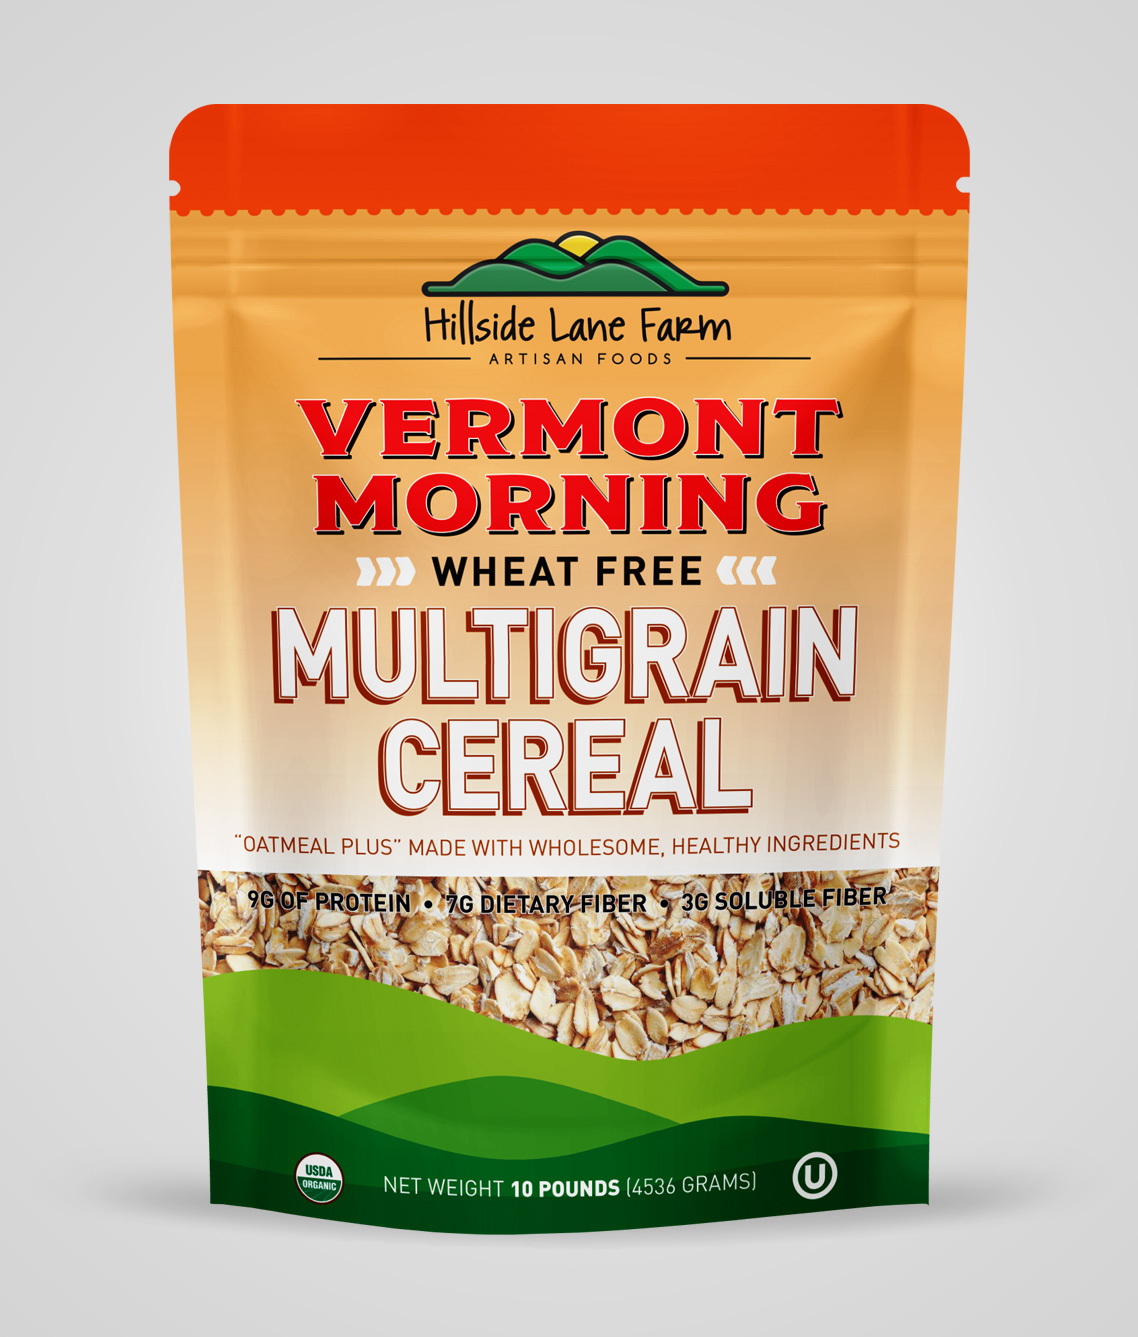 Vermont Morning Cereal Multigrain Wheat Free